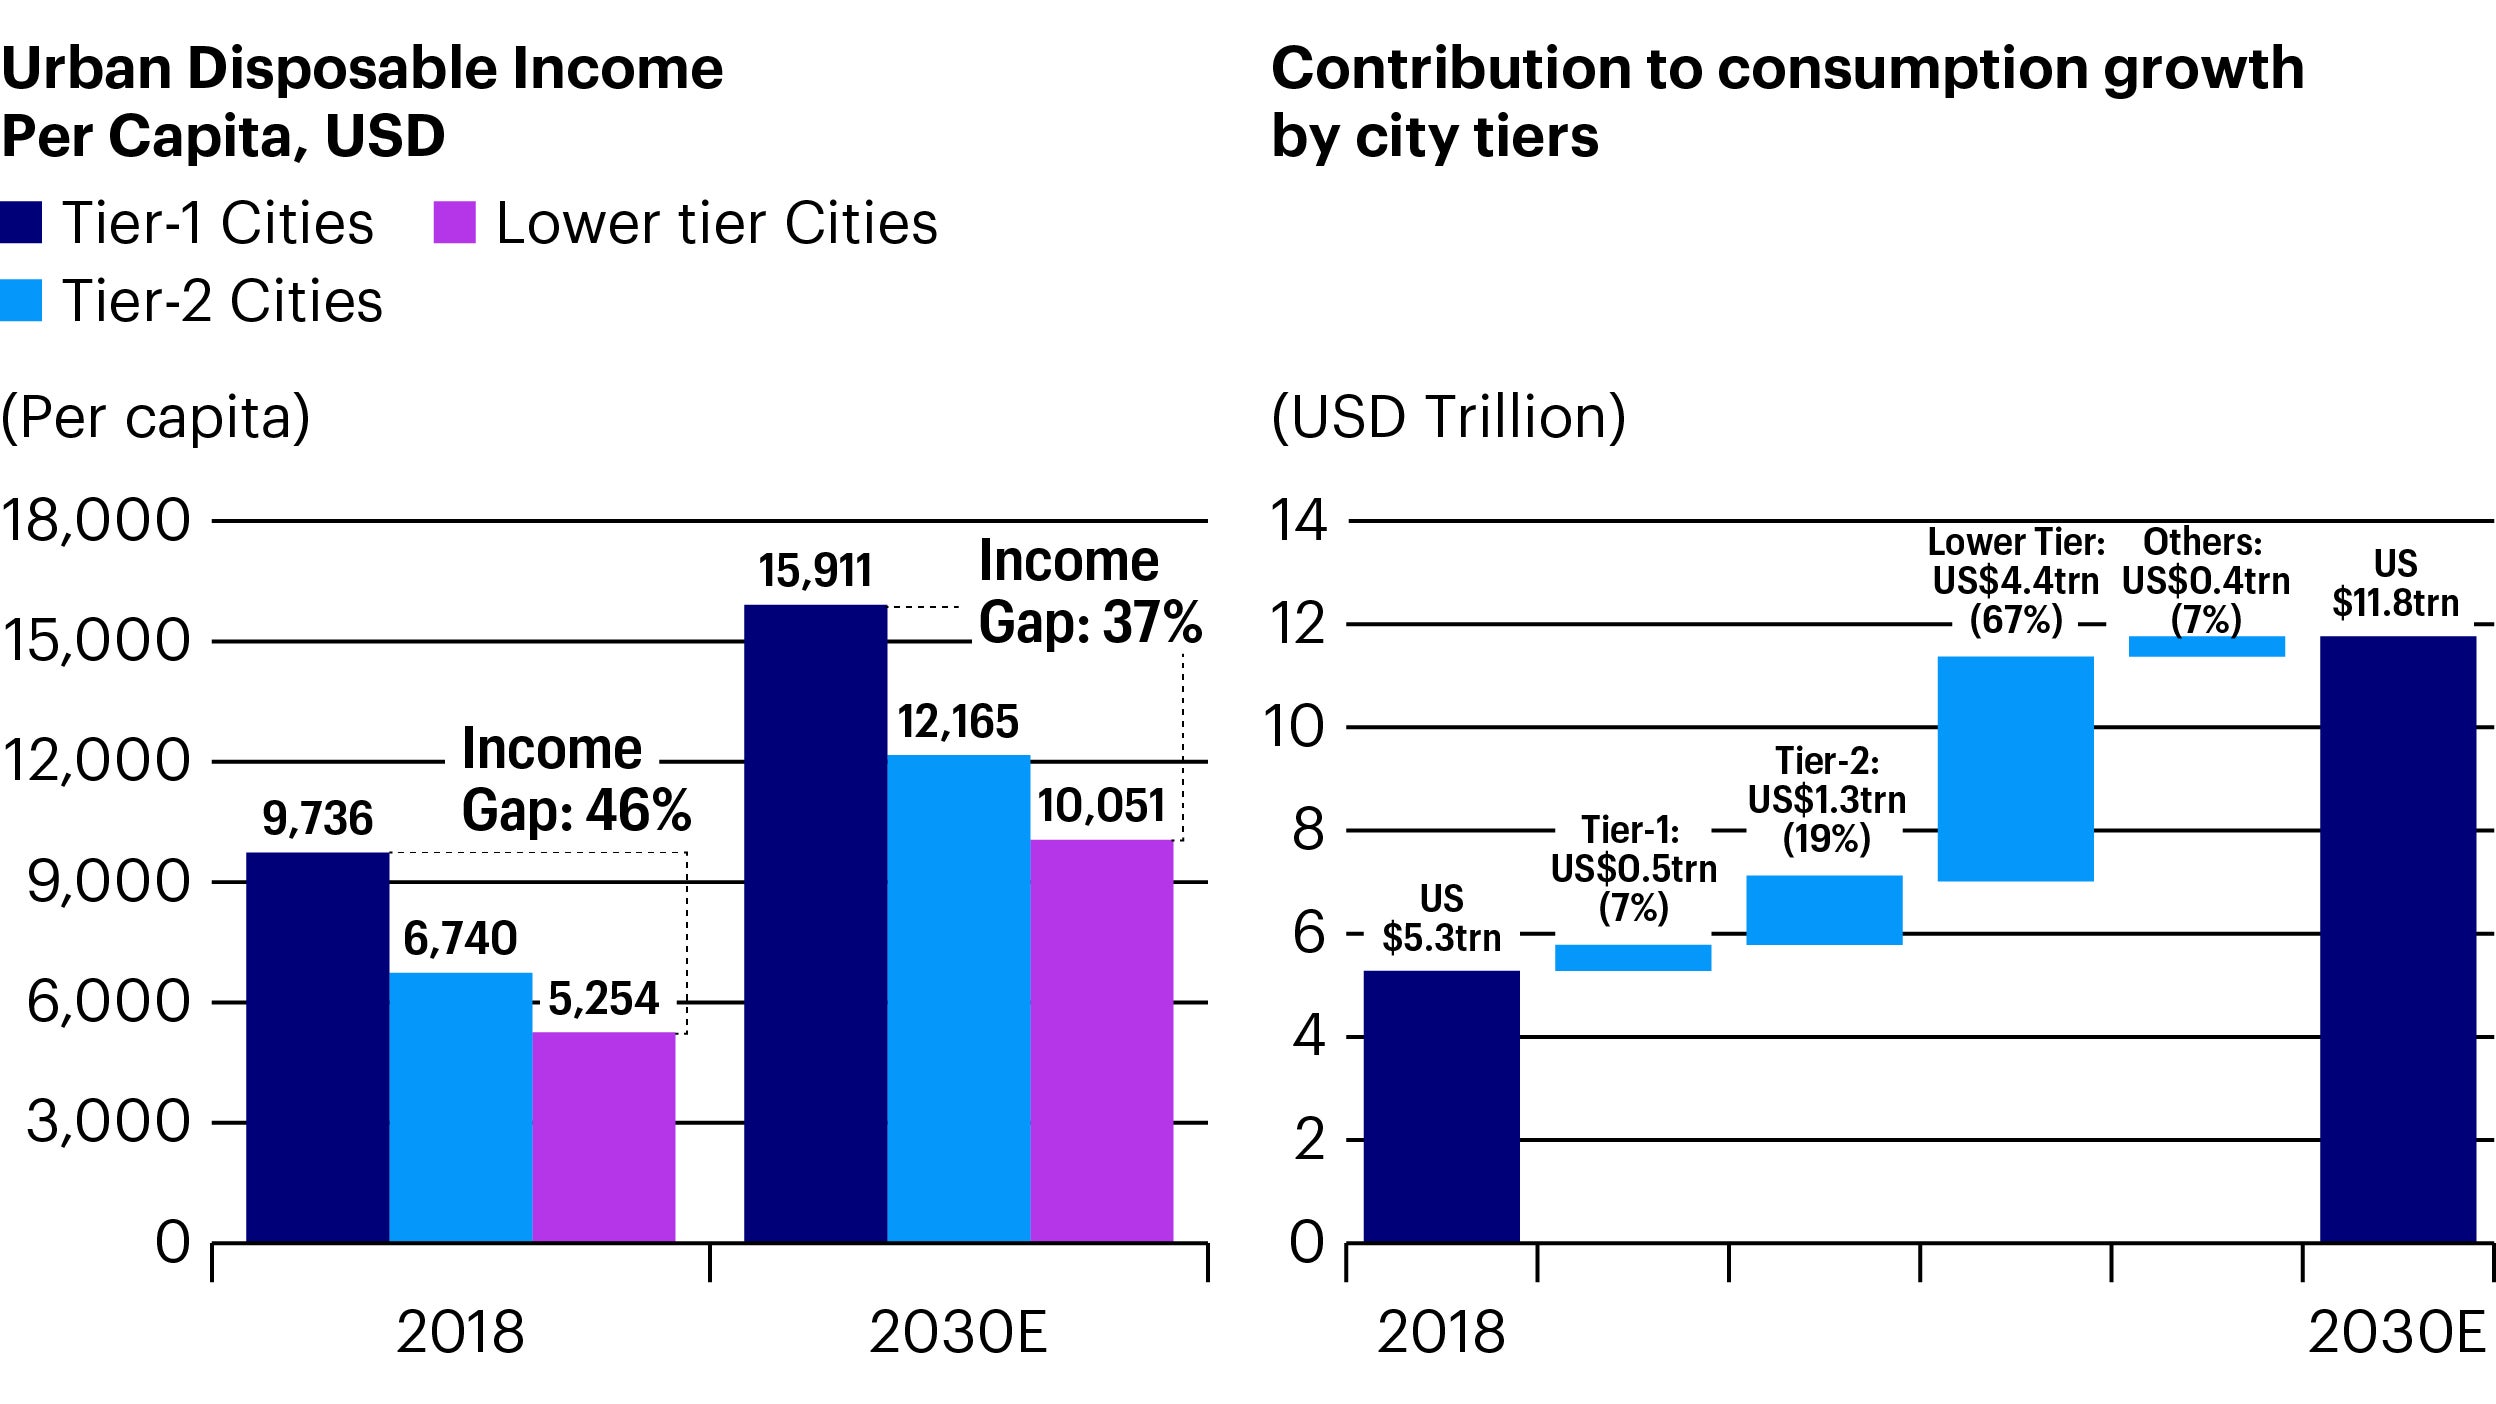 Figure 1: Income gap to narrow across Chinese cities